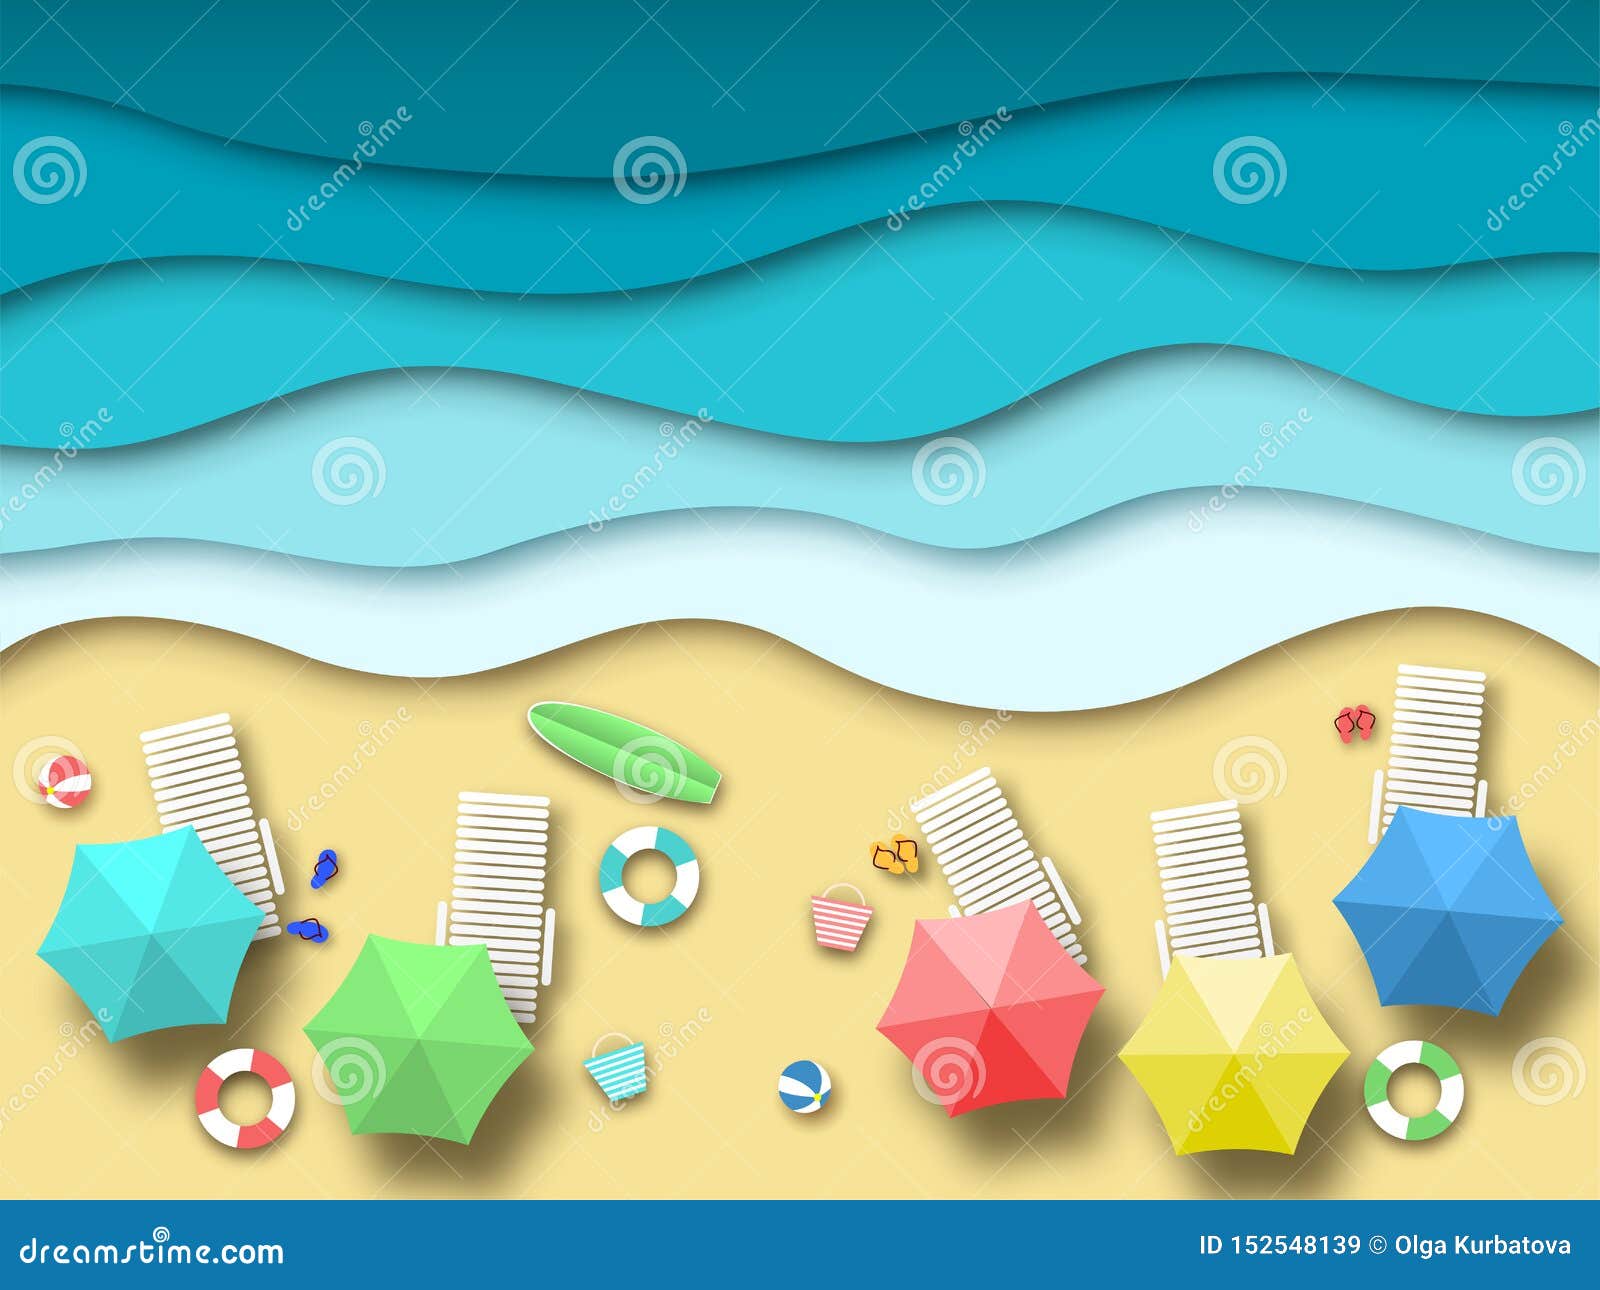 paper sea beach. summer holiday landscape with sand, ocean and sun, summertime relaxation 3d origami. paper art 